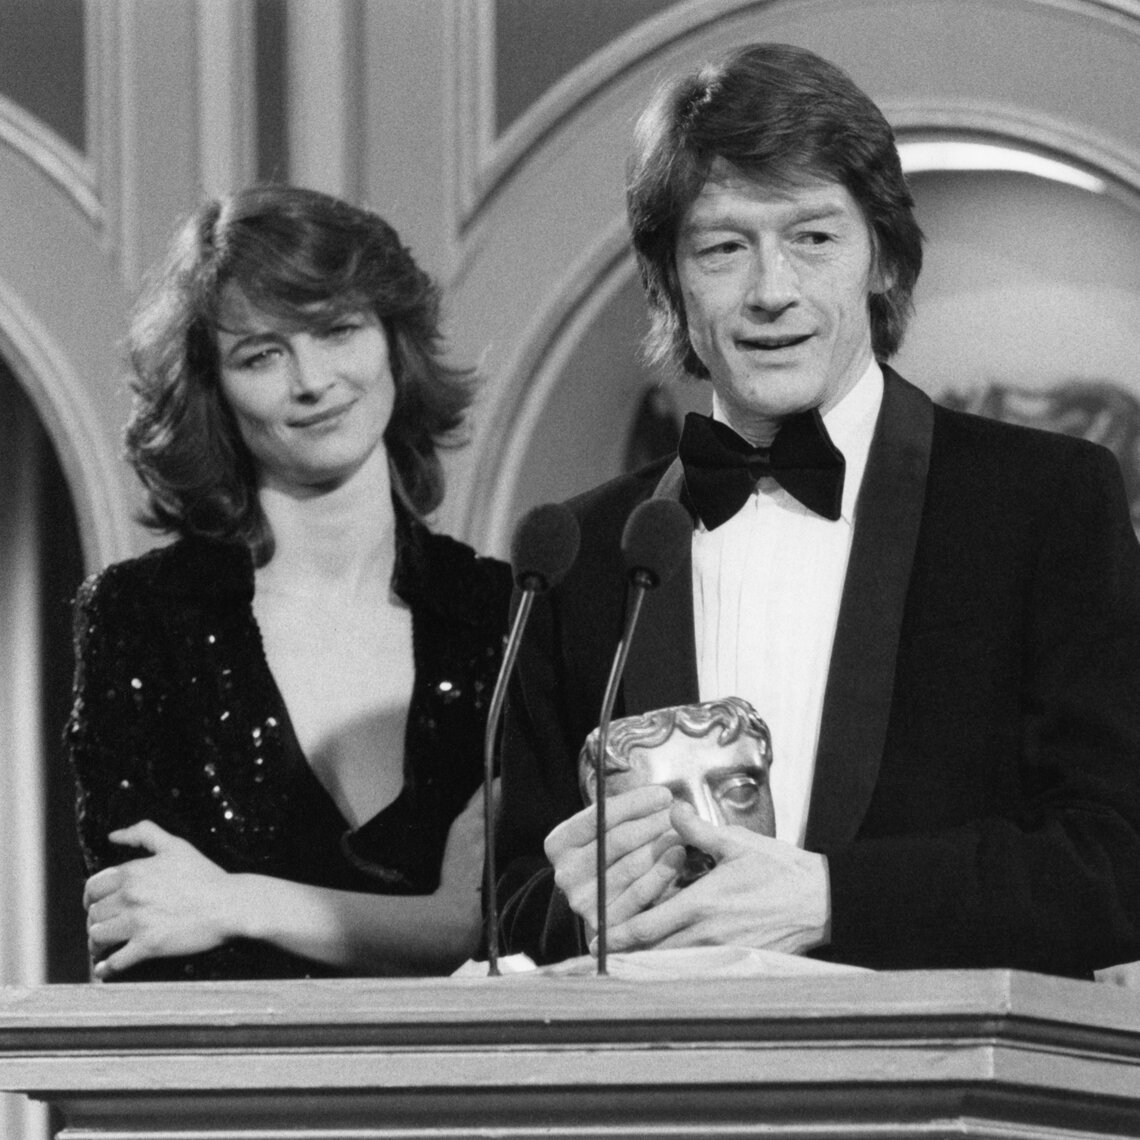 The BRITISH ACADEMY of FILM and TELEVISION ARTS AWARDS 1981